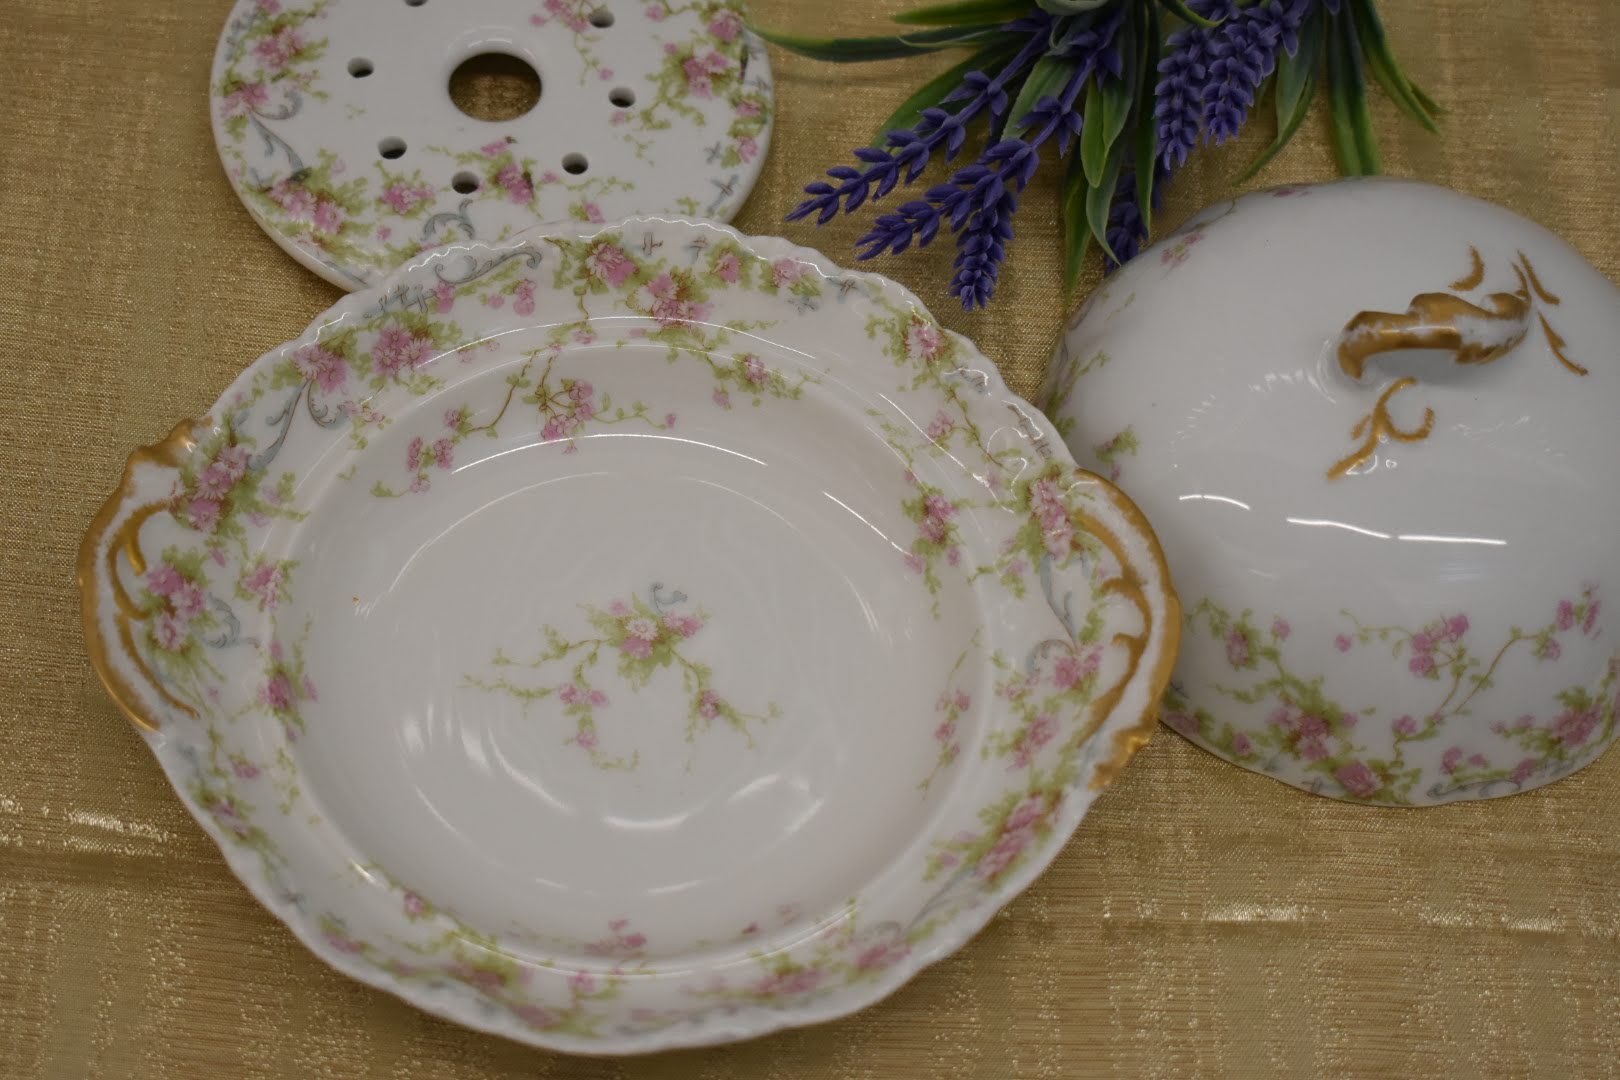 Limoges Theodore Haviland Porcelain Fine China - Mid Century - Butter Dish - Pink Green Floral Pattern - From France - Gold Trim